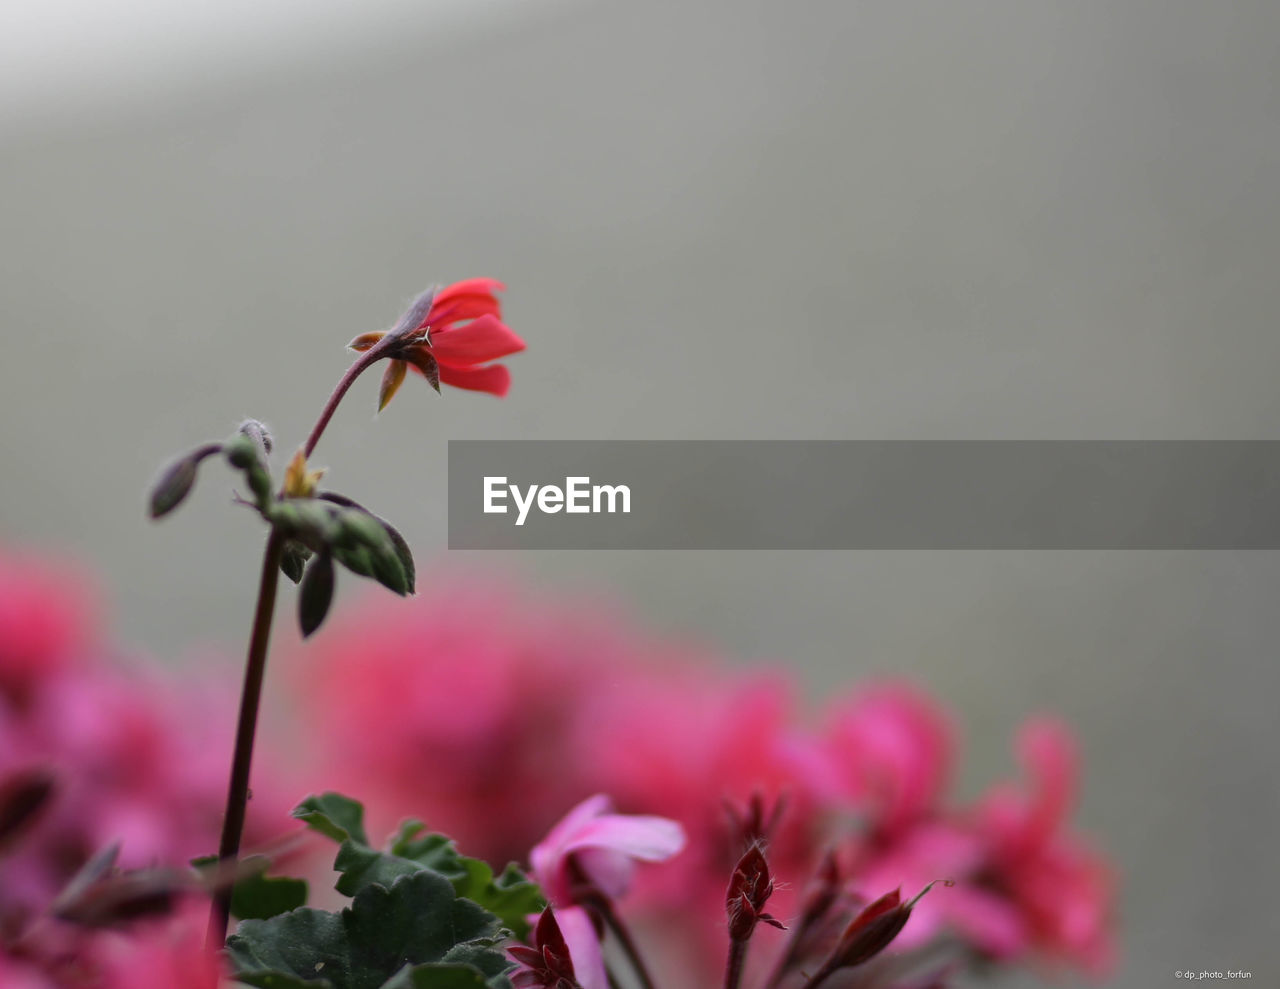 flower, plant, flowering plant, beauty in nature, freshness, nature, fragility, macro photography, close-up, pink, growth, no people, petal, flower head, blossom, inflorescence, red, plant part, focus on foreground, selective focus, outdoors, leaf, bud, plant stem, rose, springtime, botany, day